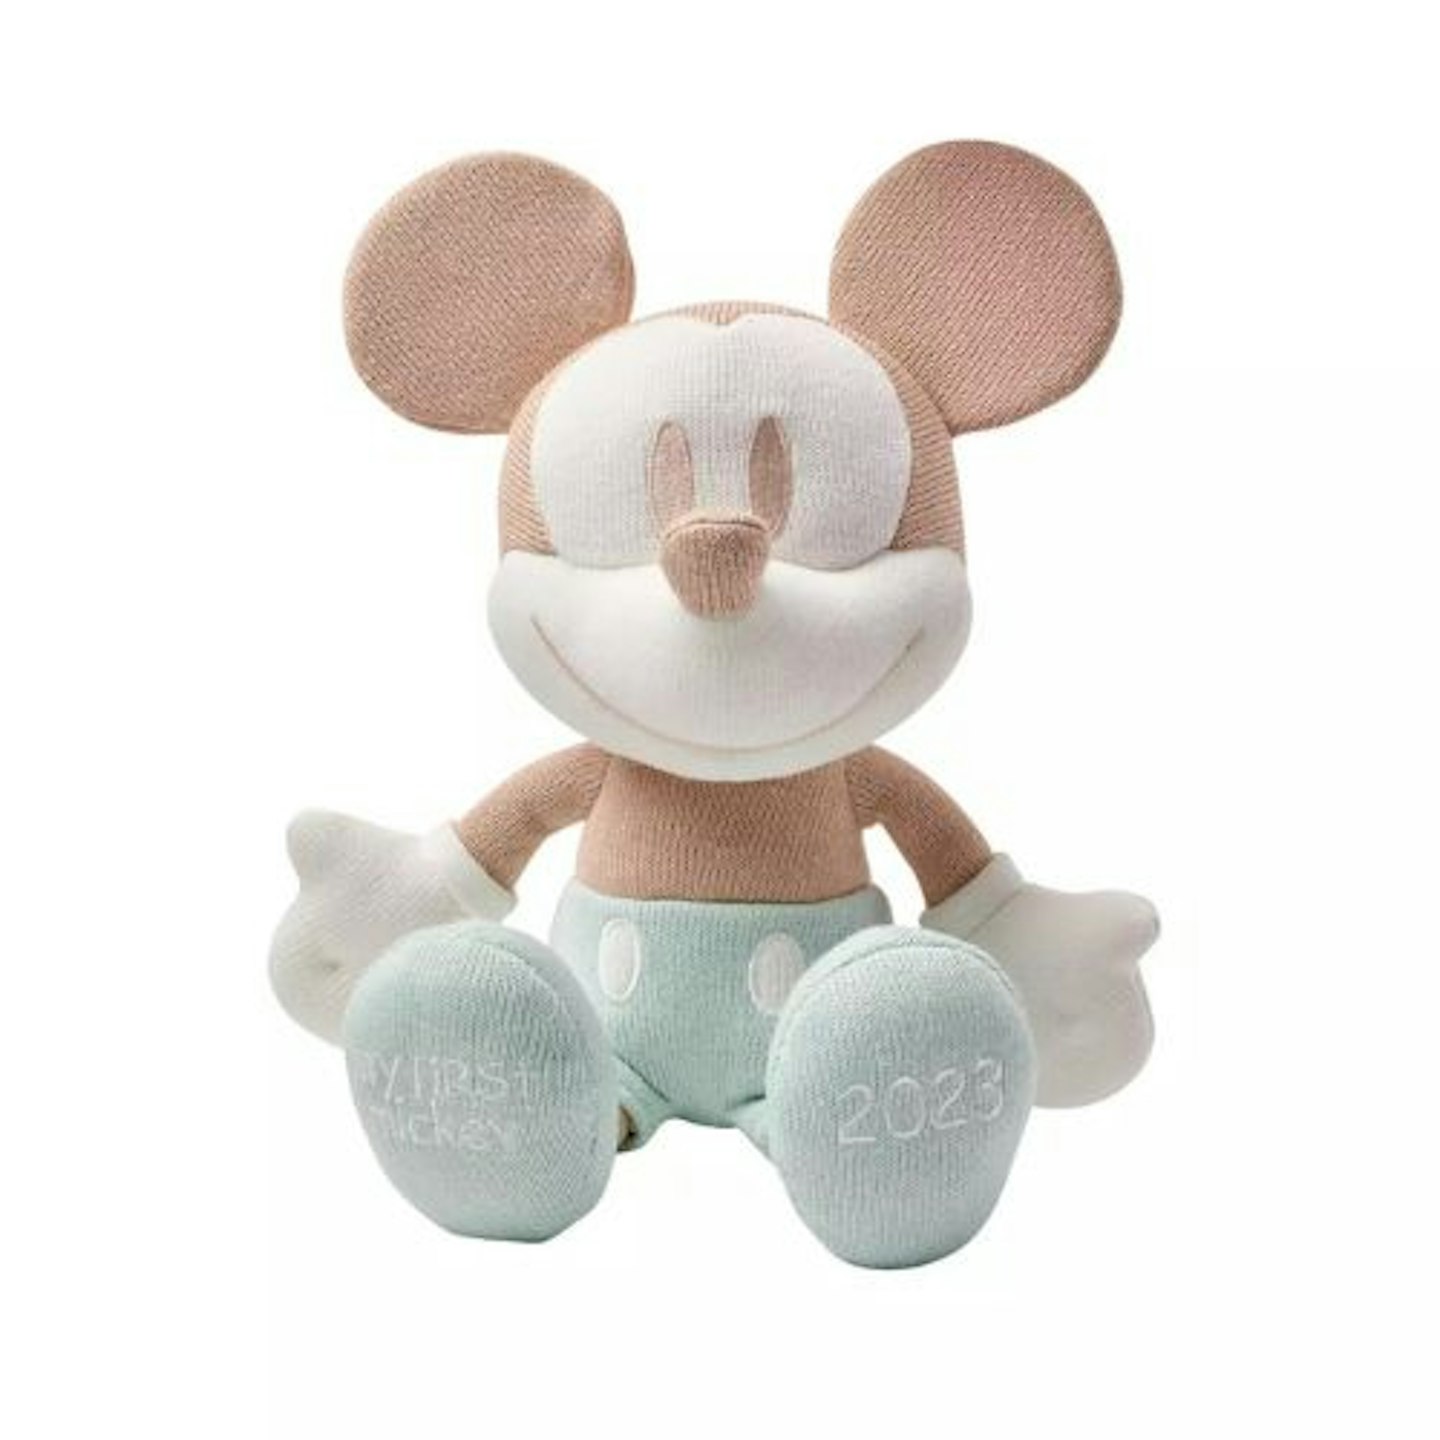 https://images.bauerhosting.com/affiliates/sites/12/2023/10/Disney-Store-My-First-Mickey-2023-Small-Soft-Toy.jpg?auto=format&w=1440&q=80